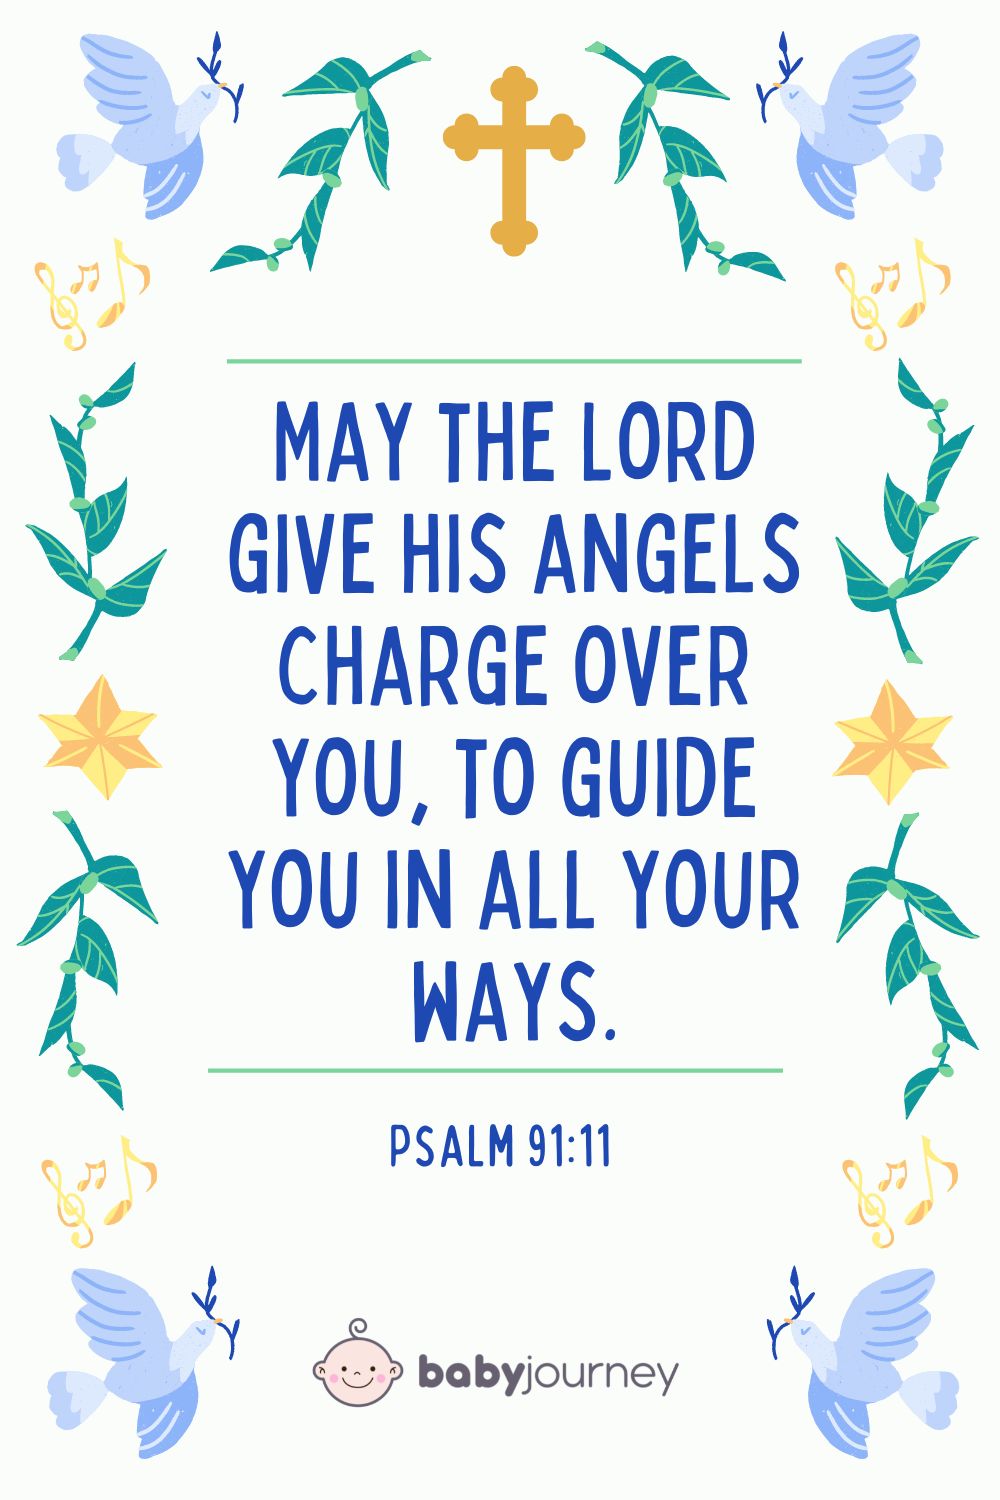 May the Lord give his angels charge over you, to guide you in all your ways. - Psalm 91:11 - Inspirational Baptism Quotes for Card - Baby Journey